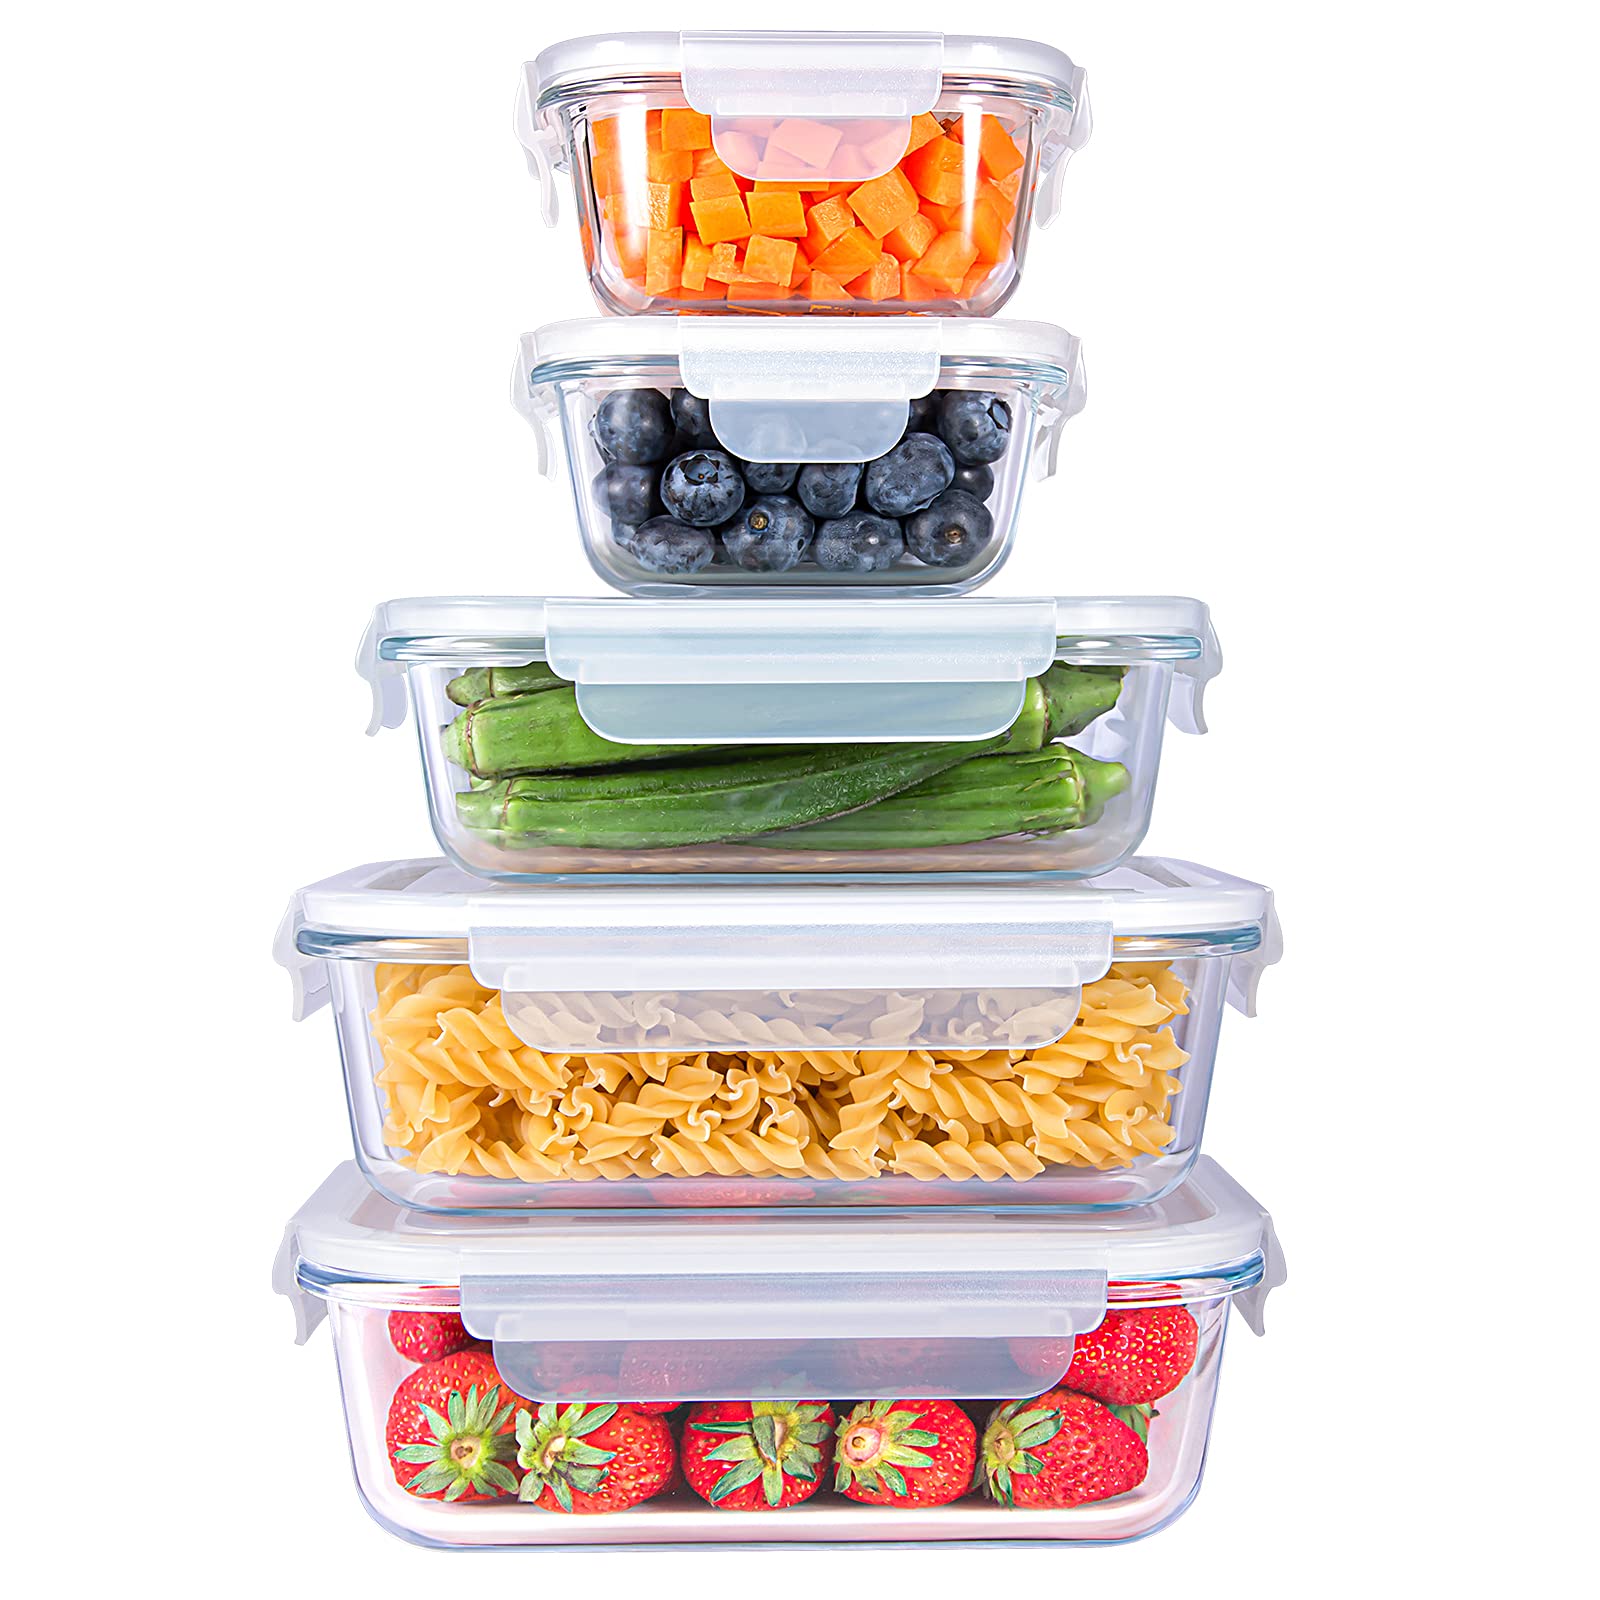 SHOMOTE Glass Food Storage Containers Set with Lids Airtight, BPA-Free Sealable Stackable Clear Portion Control Bowls, Gift Kitchen Stuff Lunch Mea...